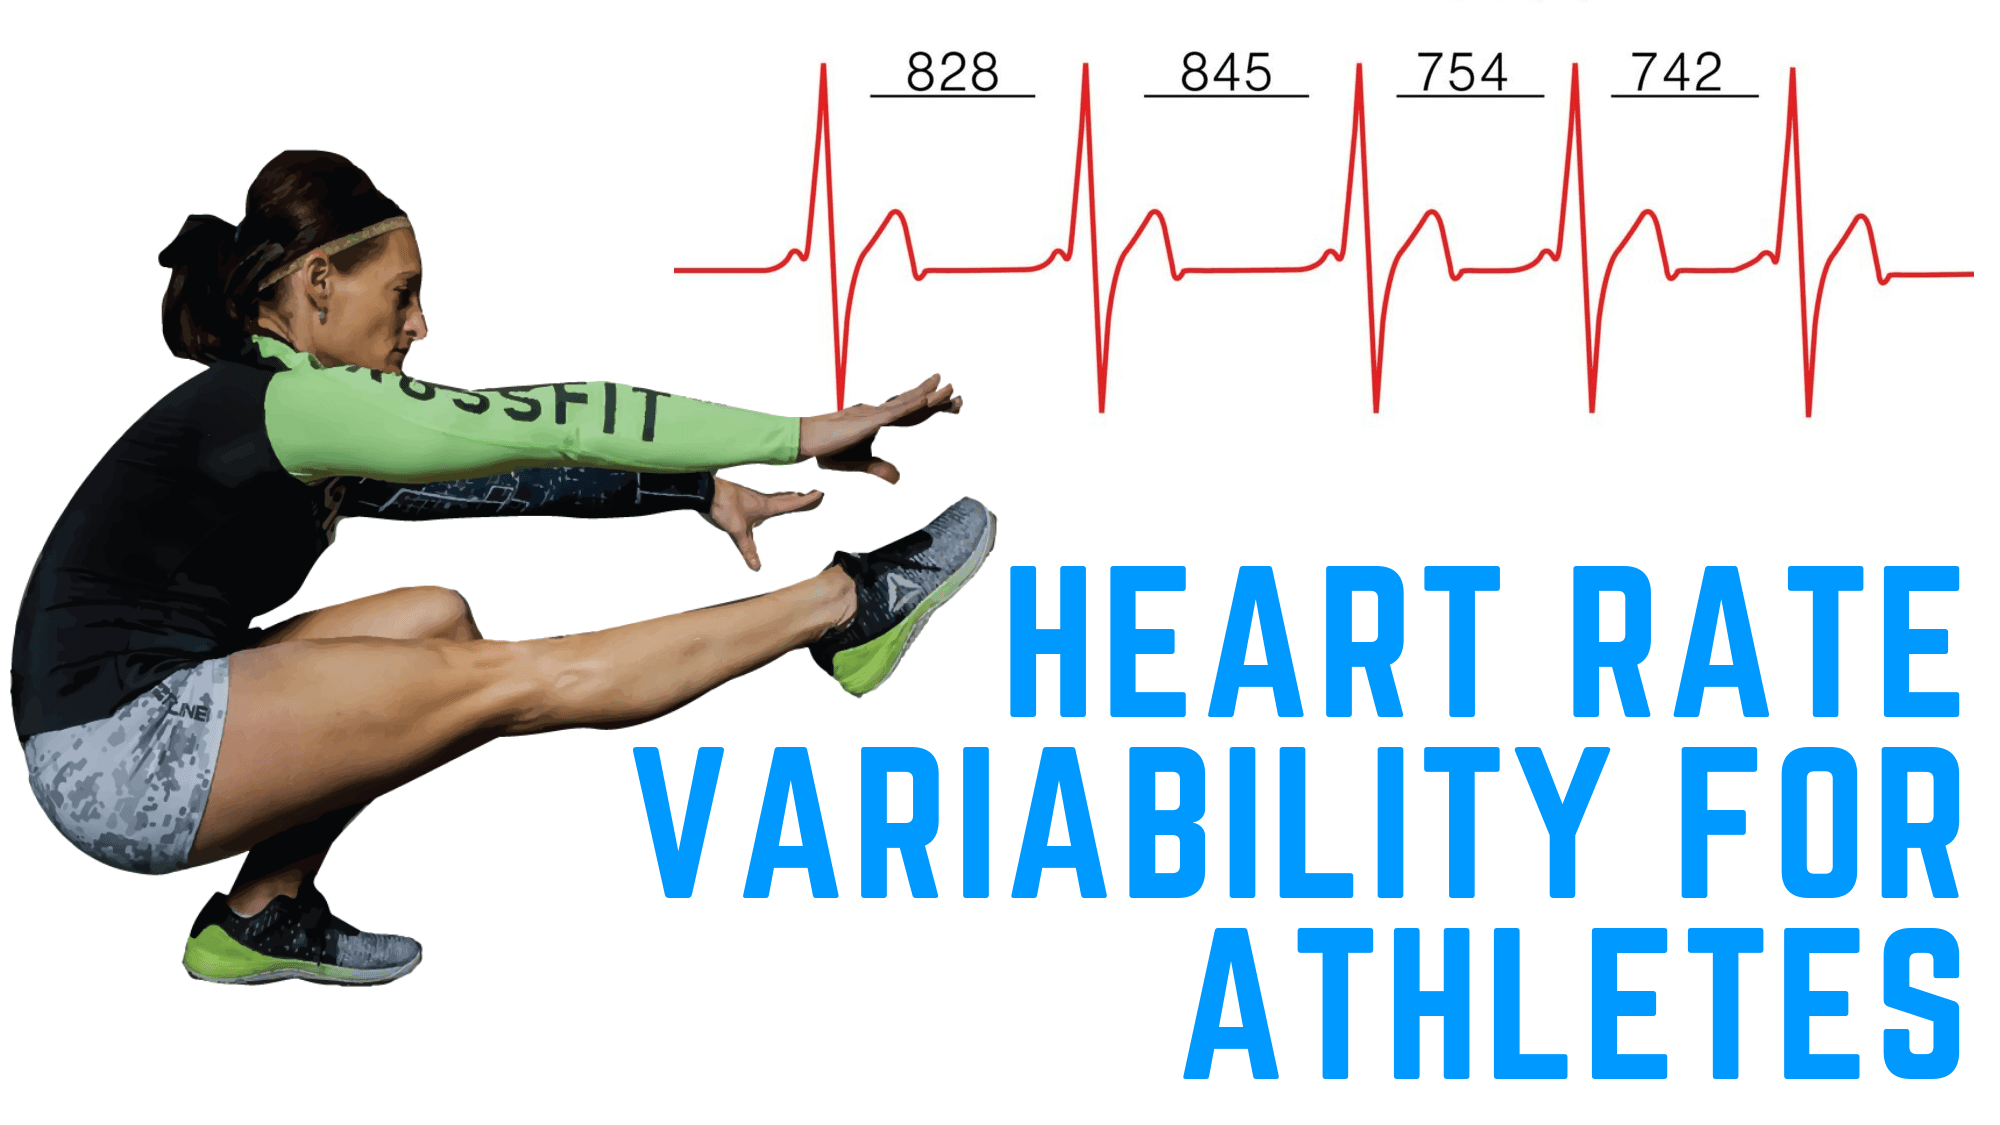 Featured image for “Heart Rate Variability For Athletes”